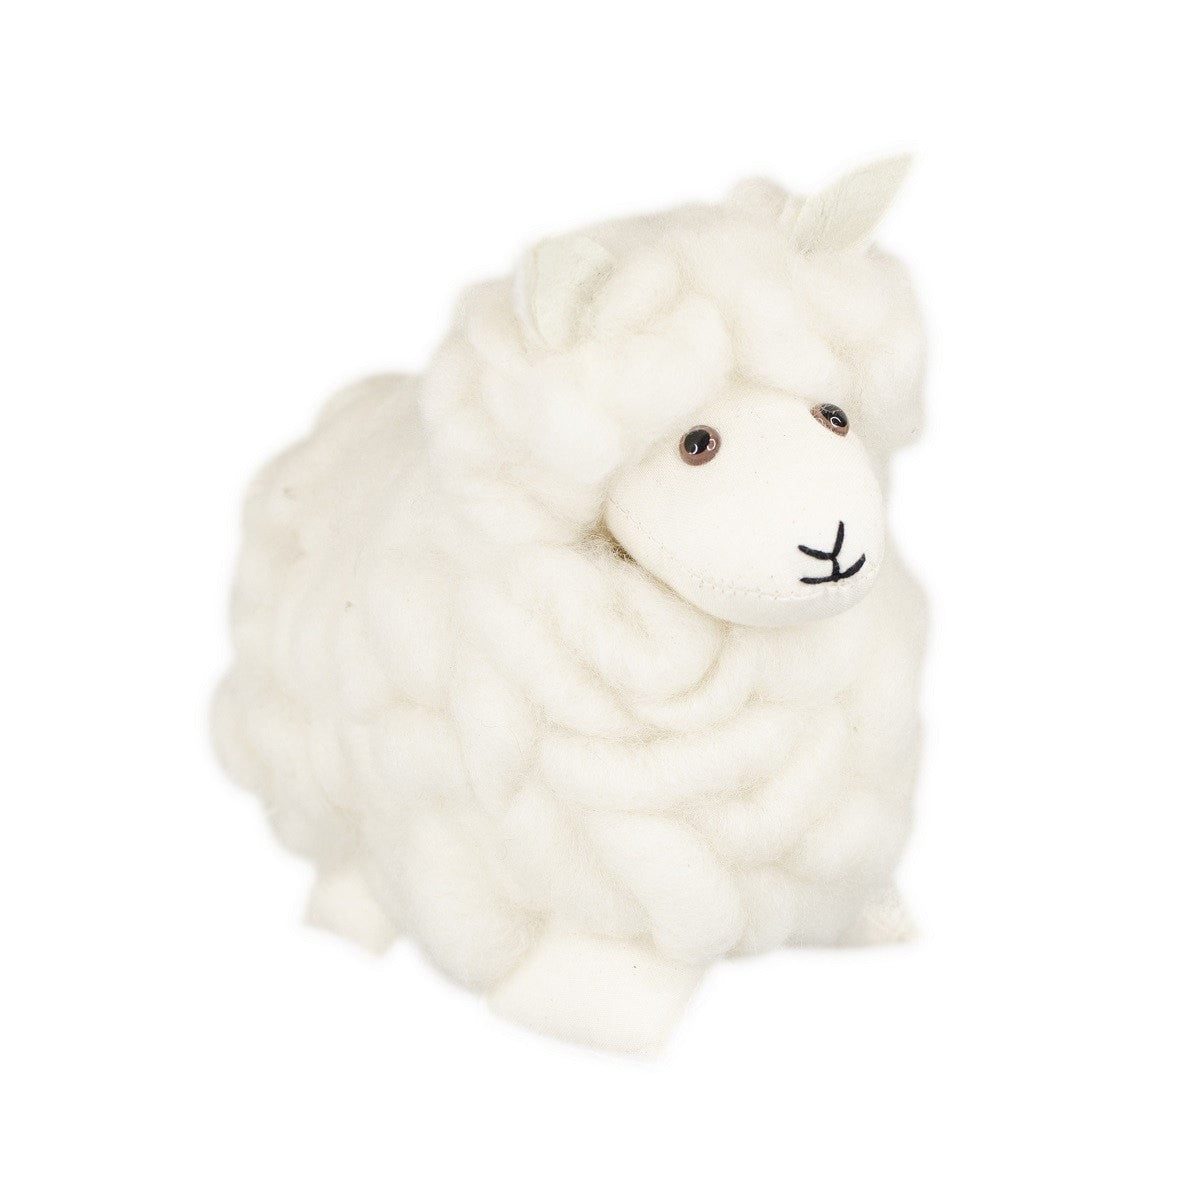 Rozcraft Gifts - Soft Toy Soft Toy Loopy Sheep Baa - White Large